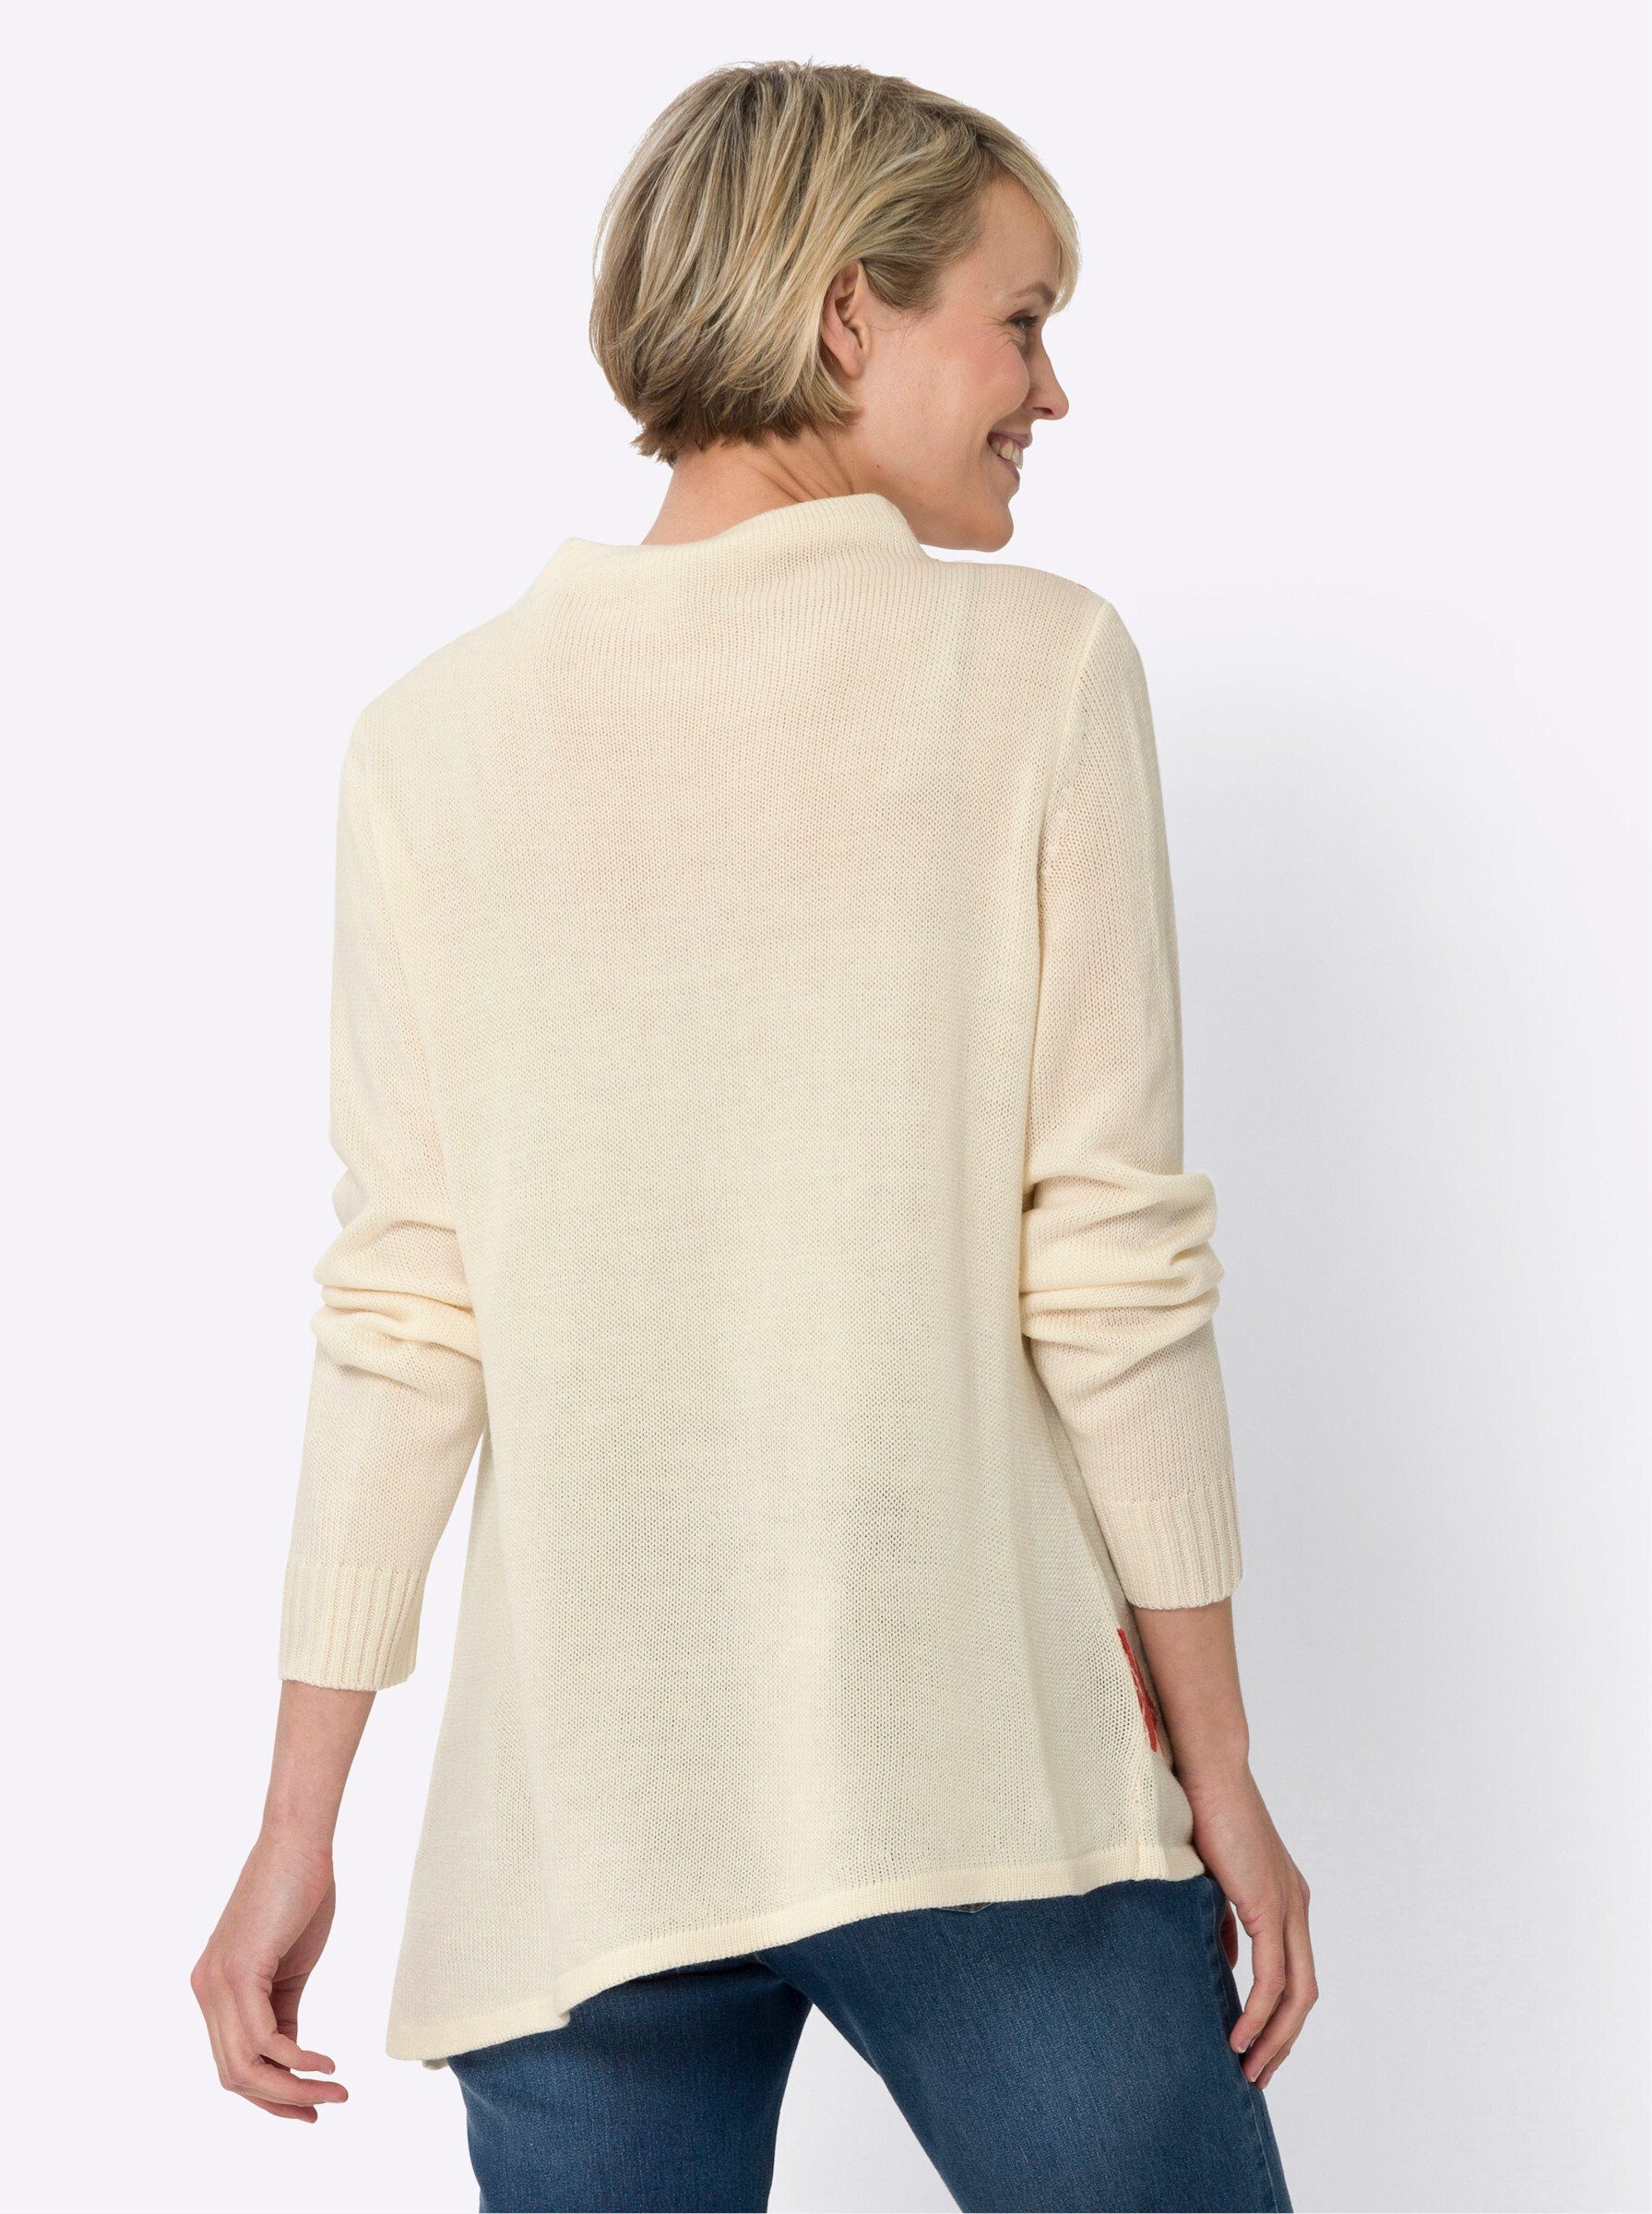 champagner-oliv Sieh Strickpullover an!